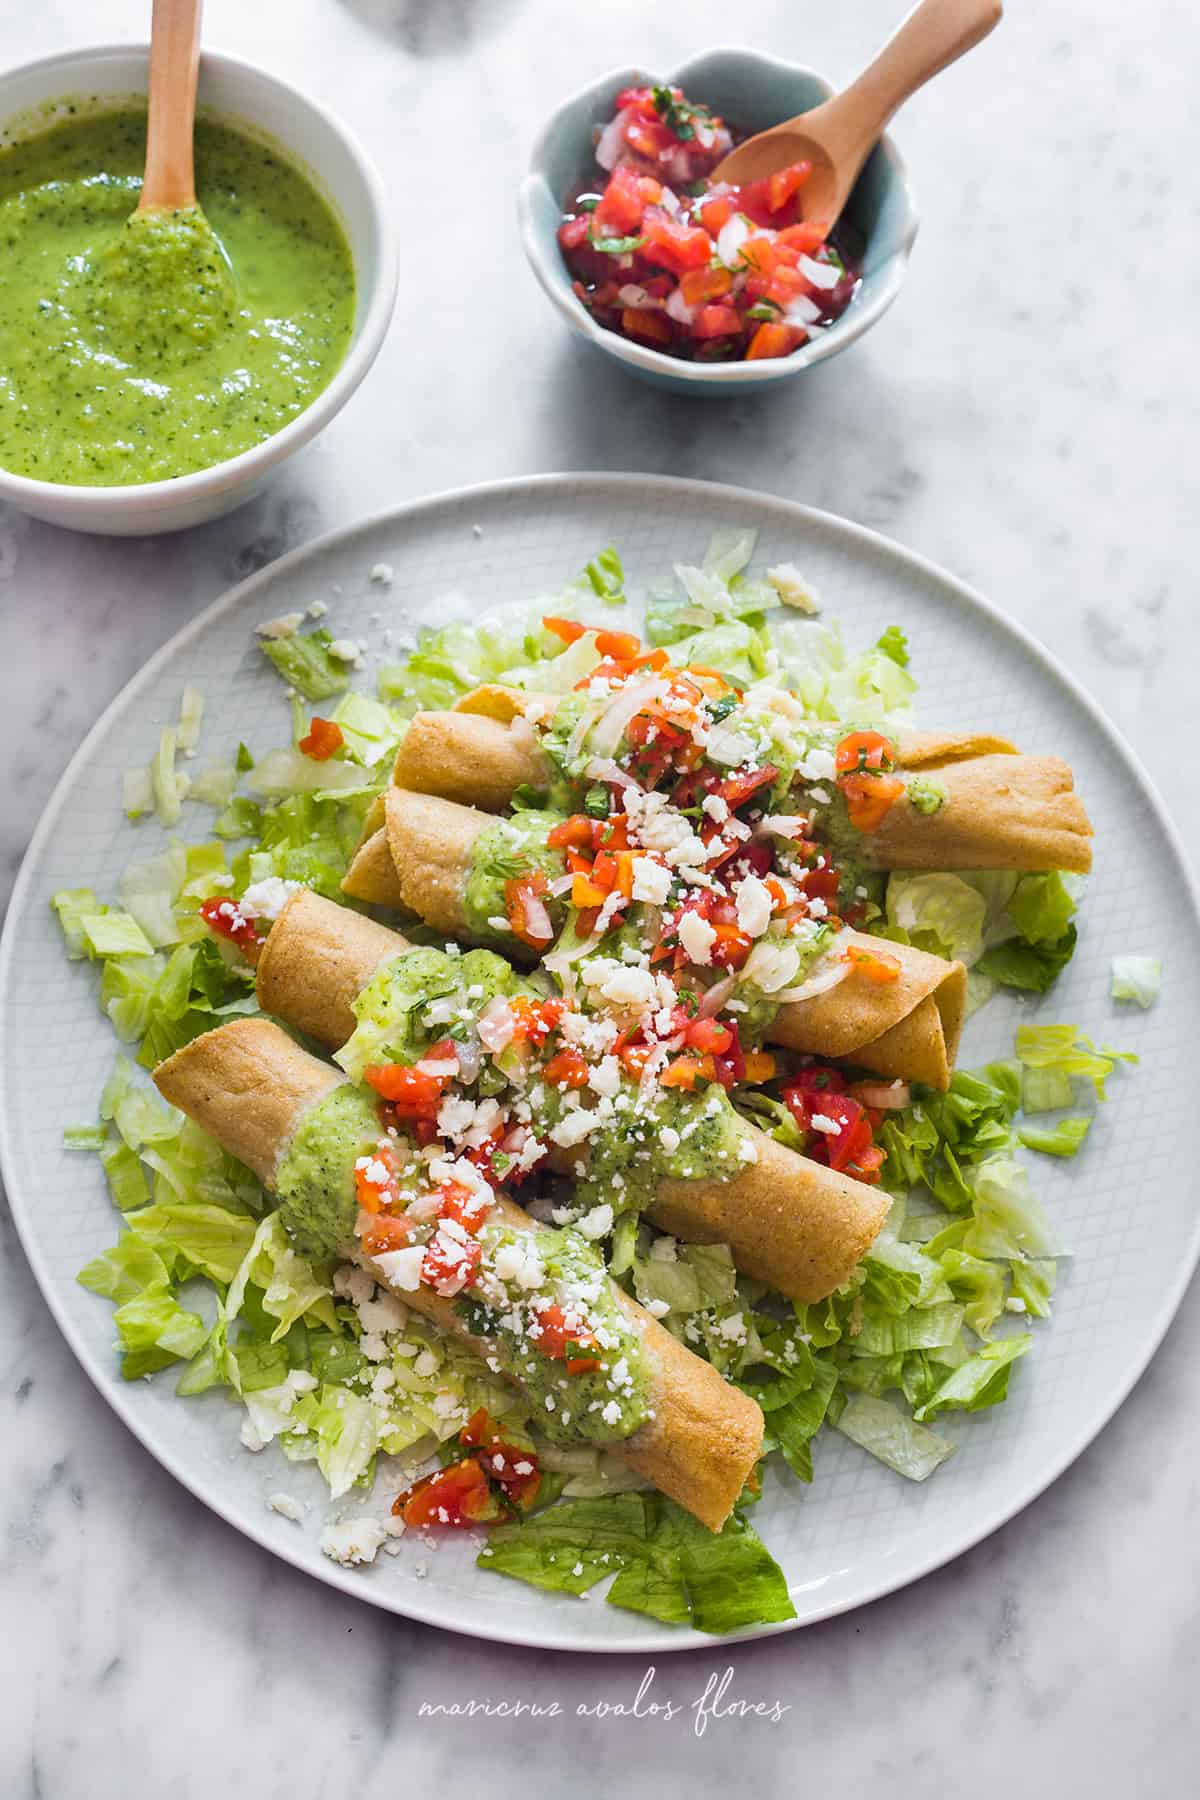 Chicken rolled tacos served with lettuce, pico de gallo and guacamole salsa.